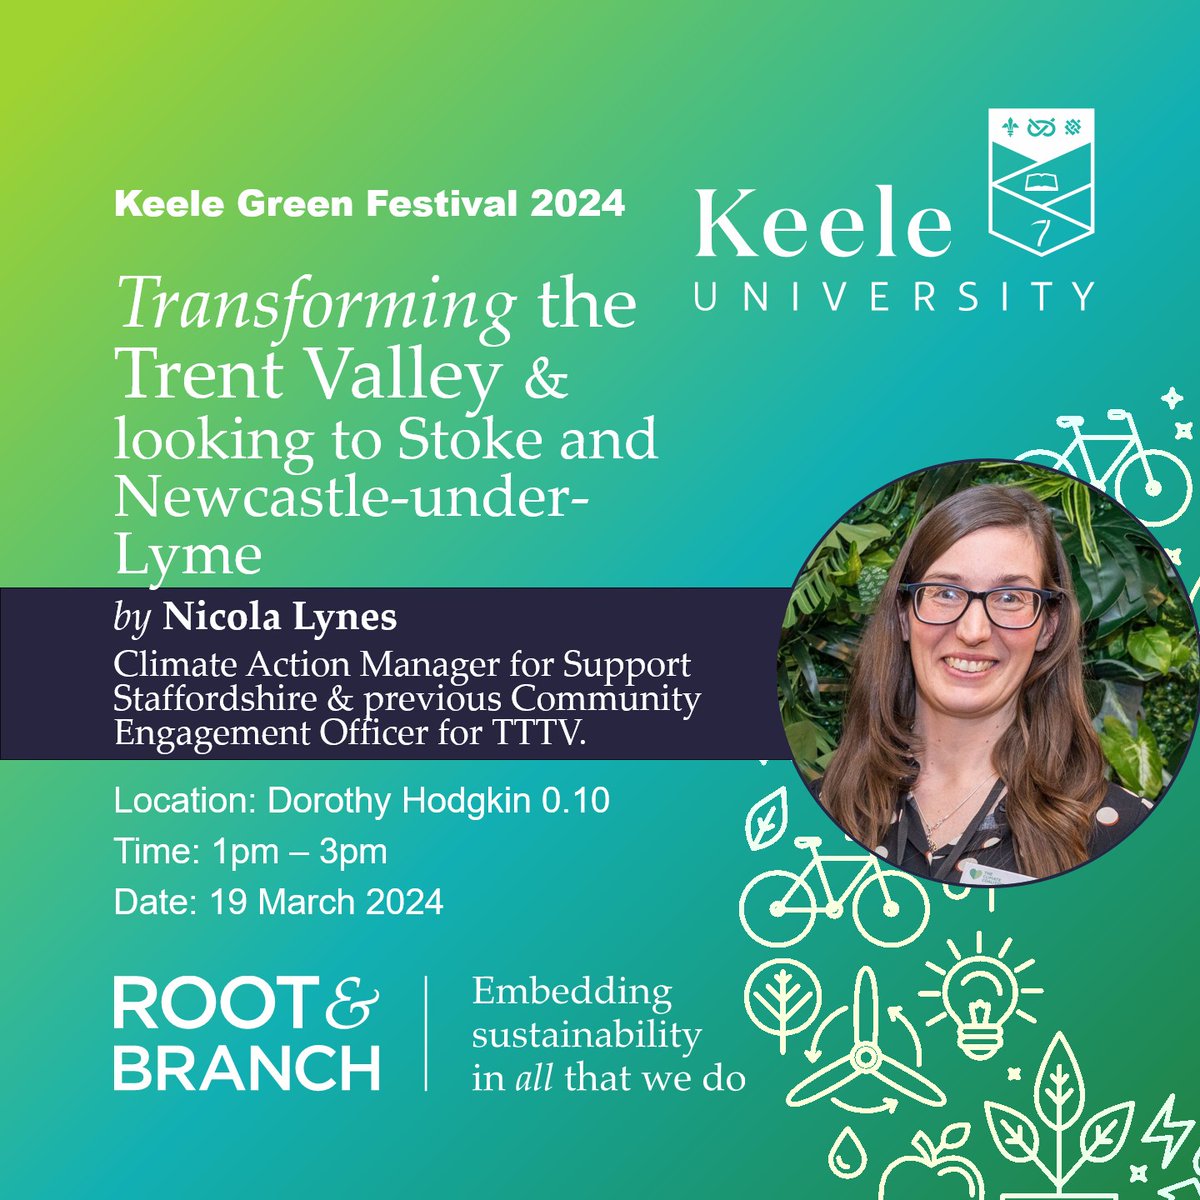 #KeeleGreenFestival GUEST TALK with Nicola Lynes on Tuesday 19 March 2024 about Transforming the Trent Valley and looking to Stoke and Newcastle-under-Lyme: community engagement and climate action from 1:00 pm in Dorothy Hodgkin 0.10 Learn more: keele.ac.uk/about/sustaina…